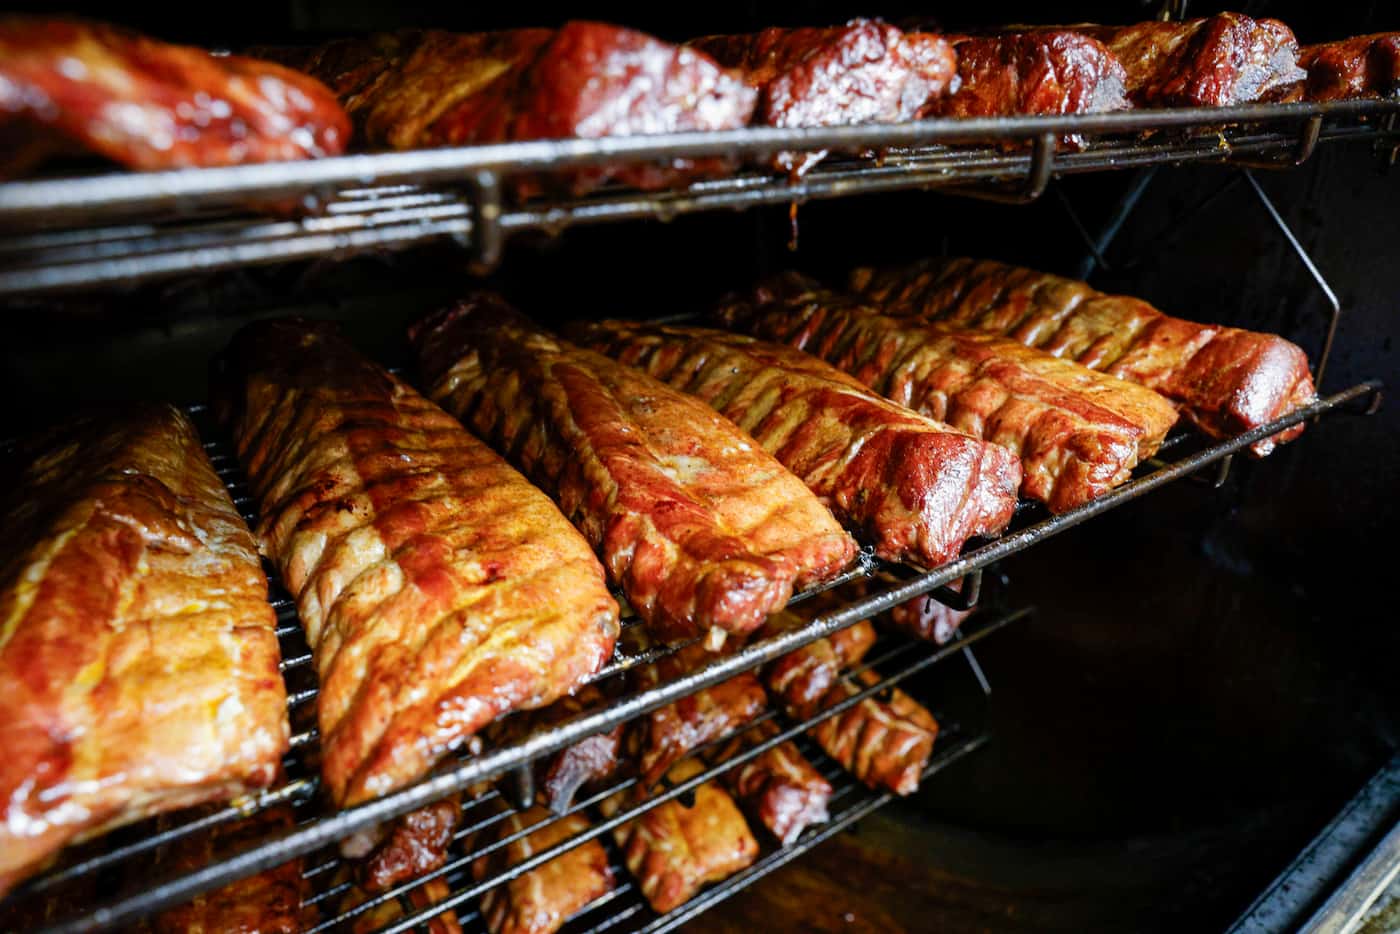 Racks of ribs rotate on the rotisserie smoker at Ribbee’s in Fort Worth. Barbecue fans,...